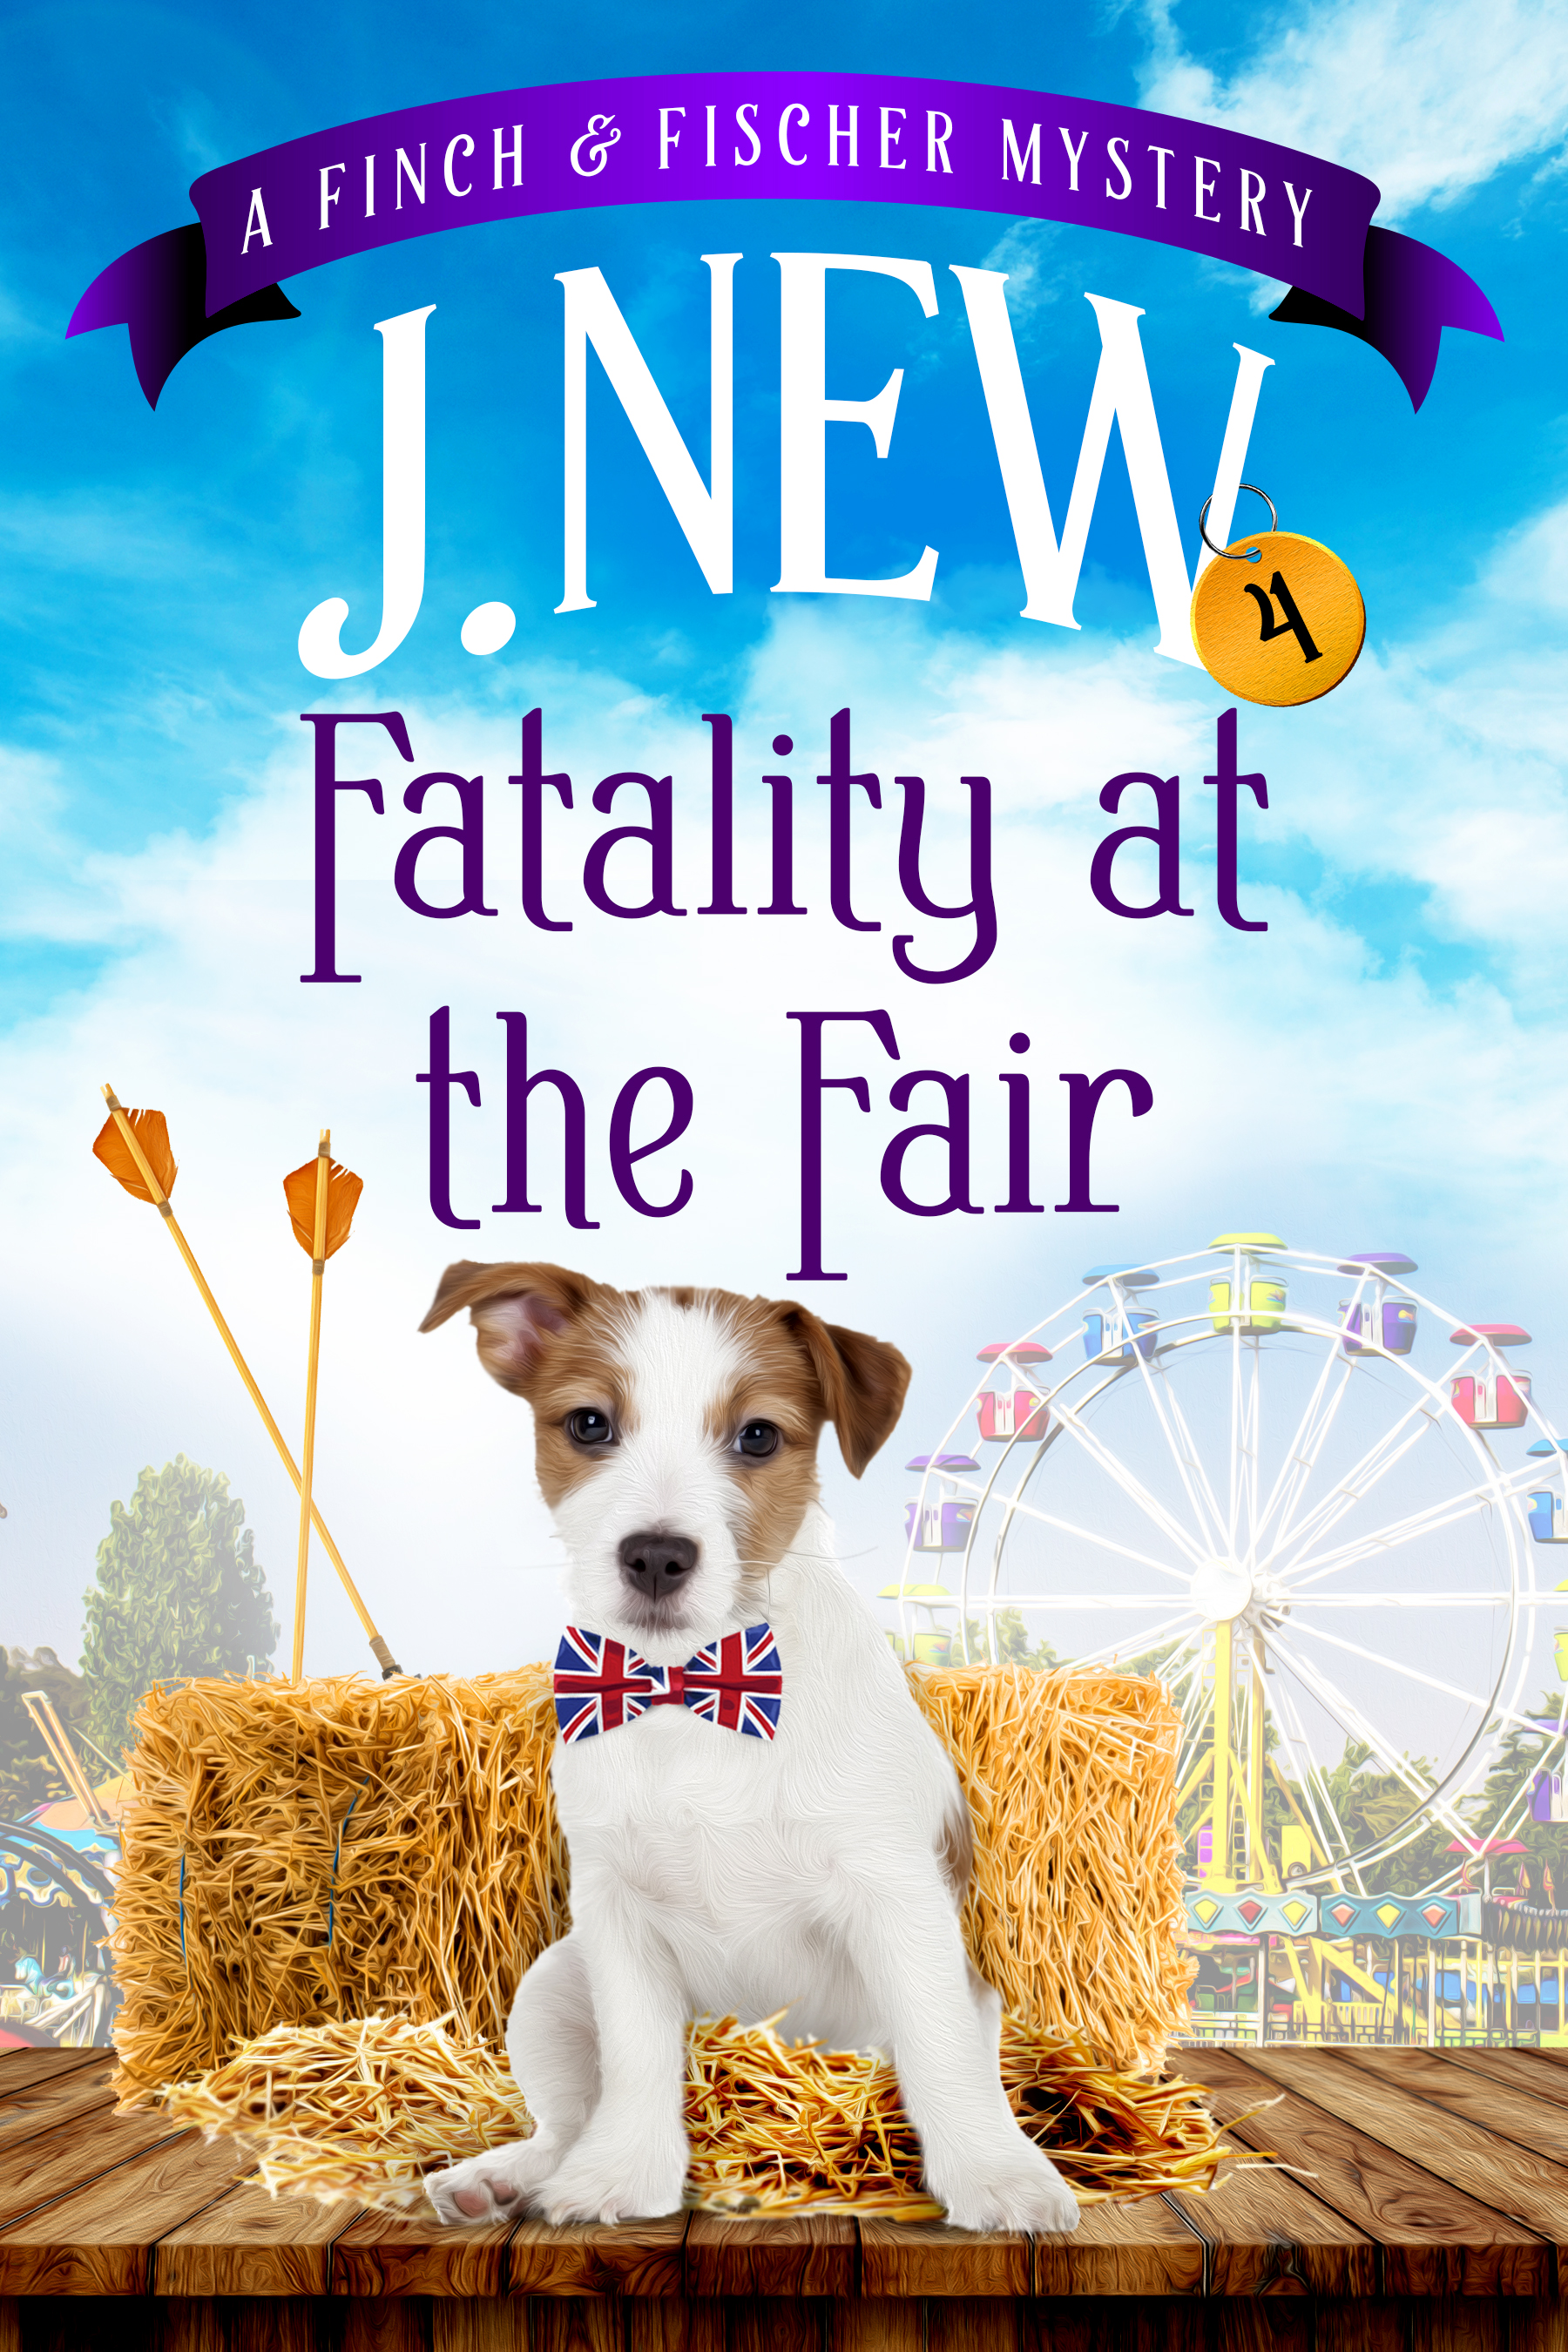 Fatality at the Fair book 4 in the Finch and Fischer British cozy mystery series by British author J. New